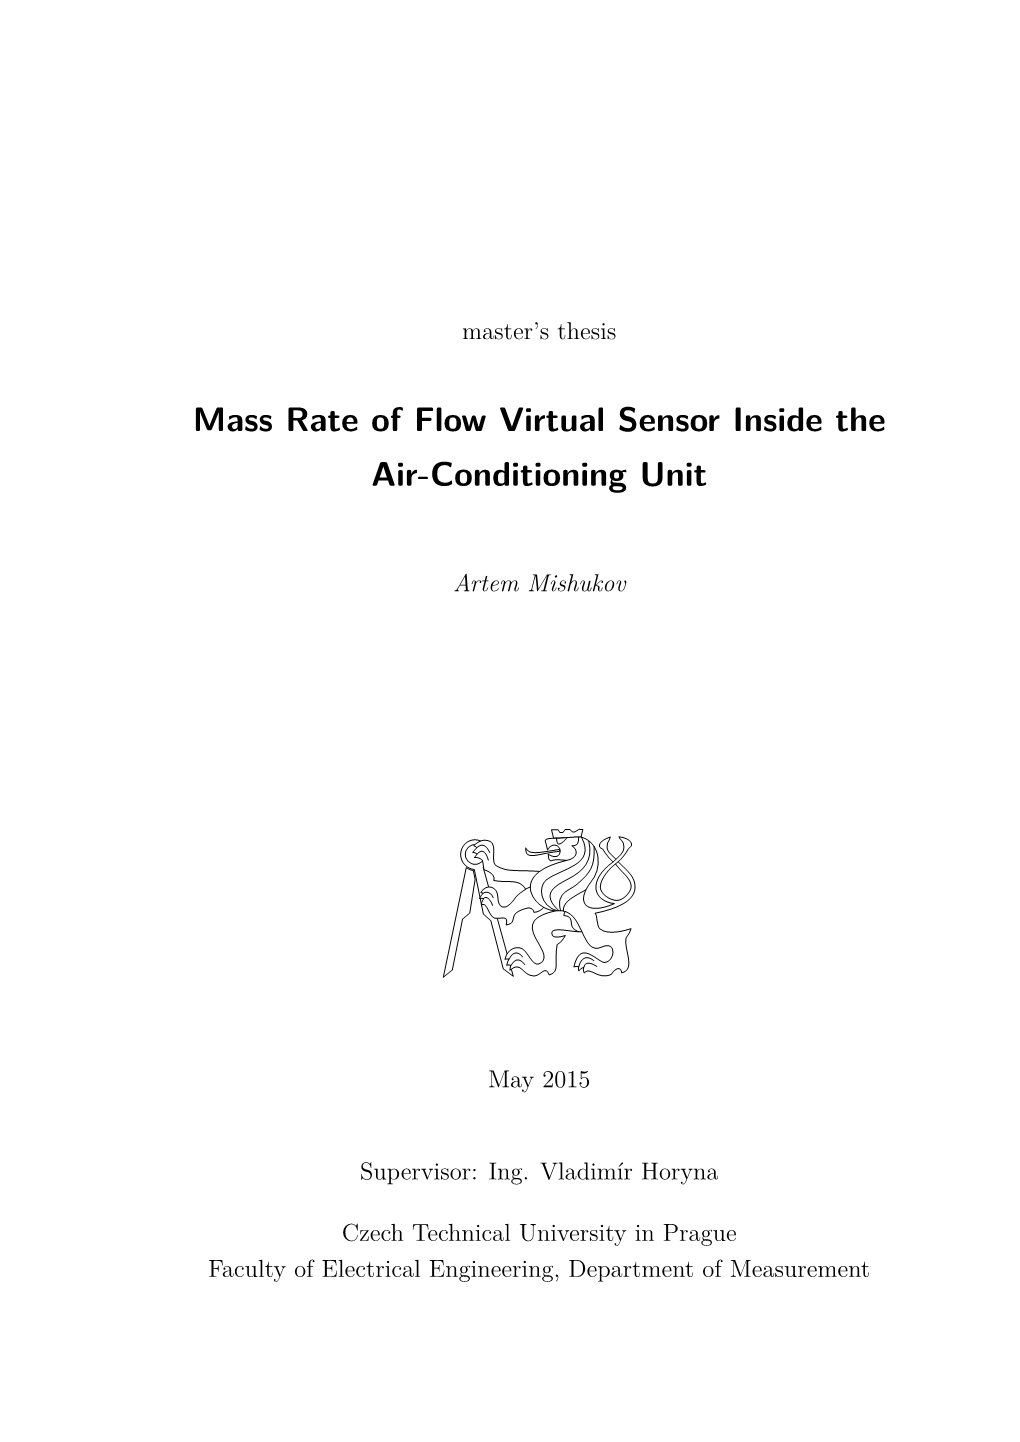 Mass Rate of Flow Virtual Sensor Inside the Air-Conditioning Unit